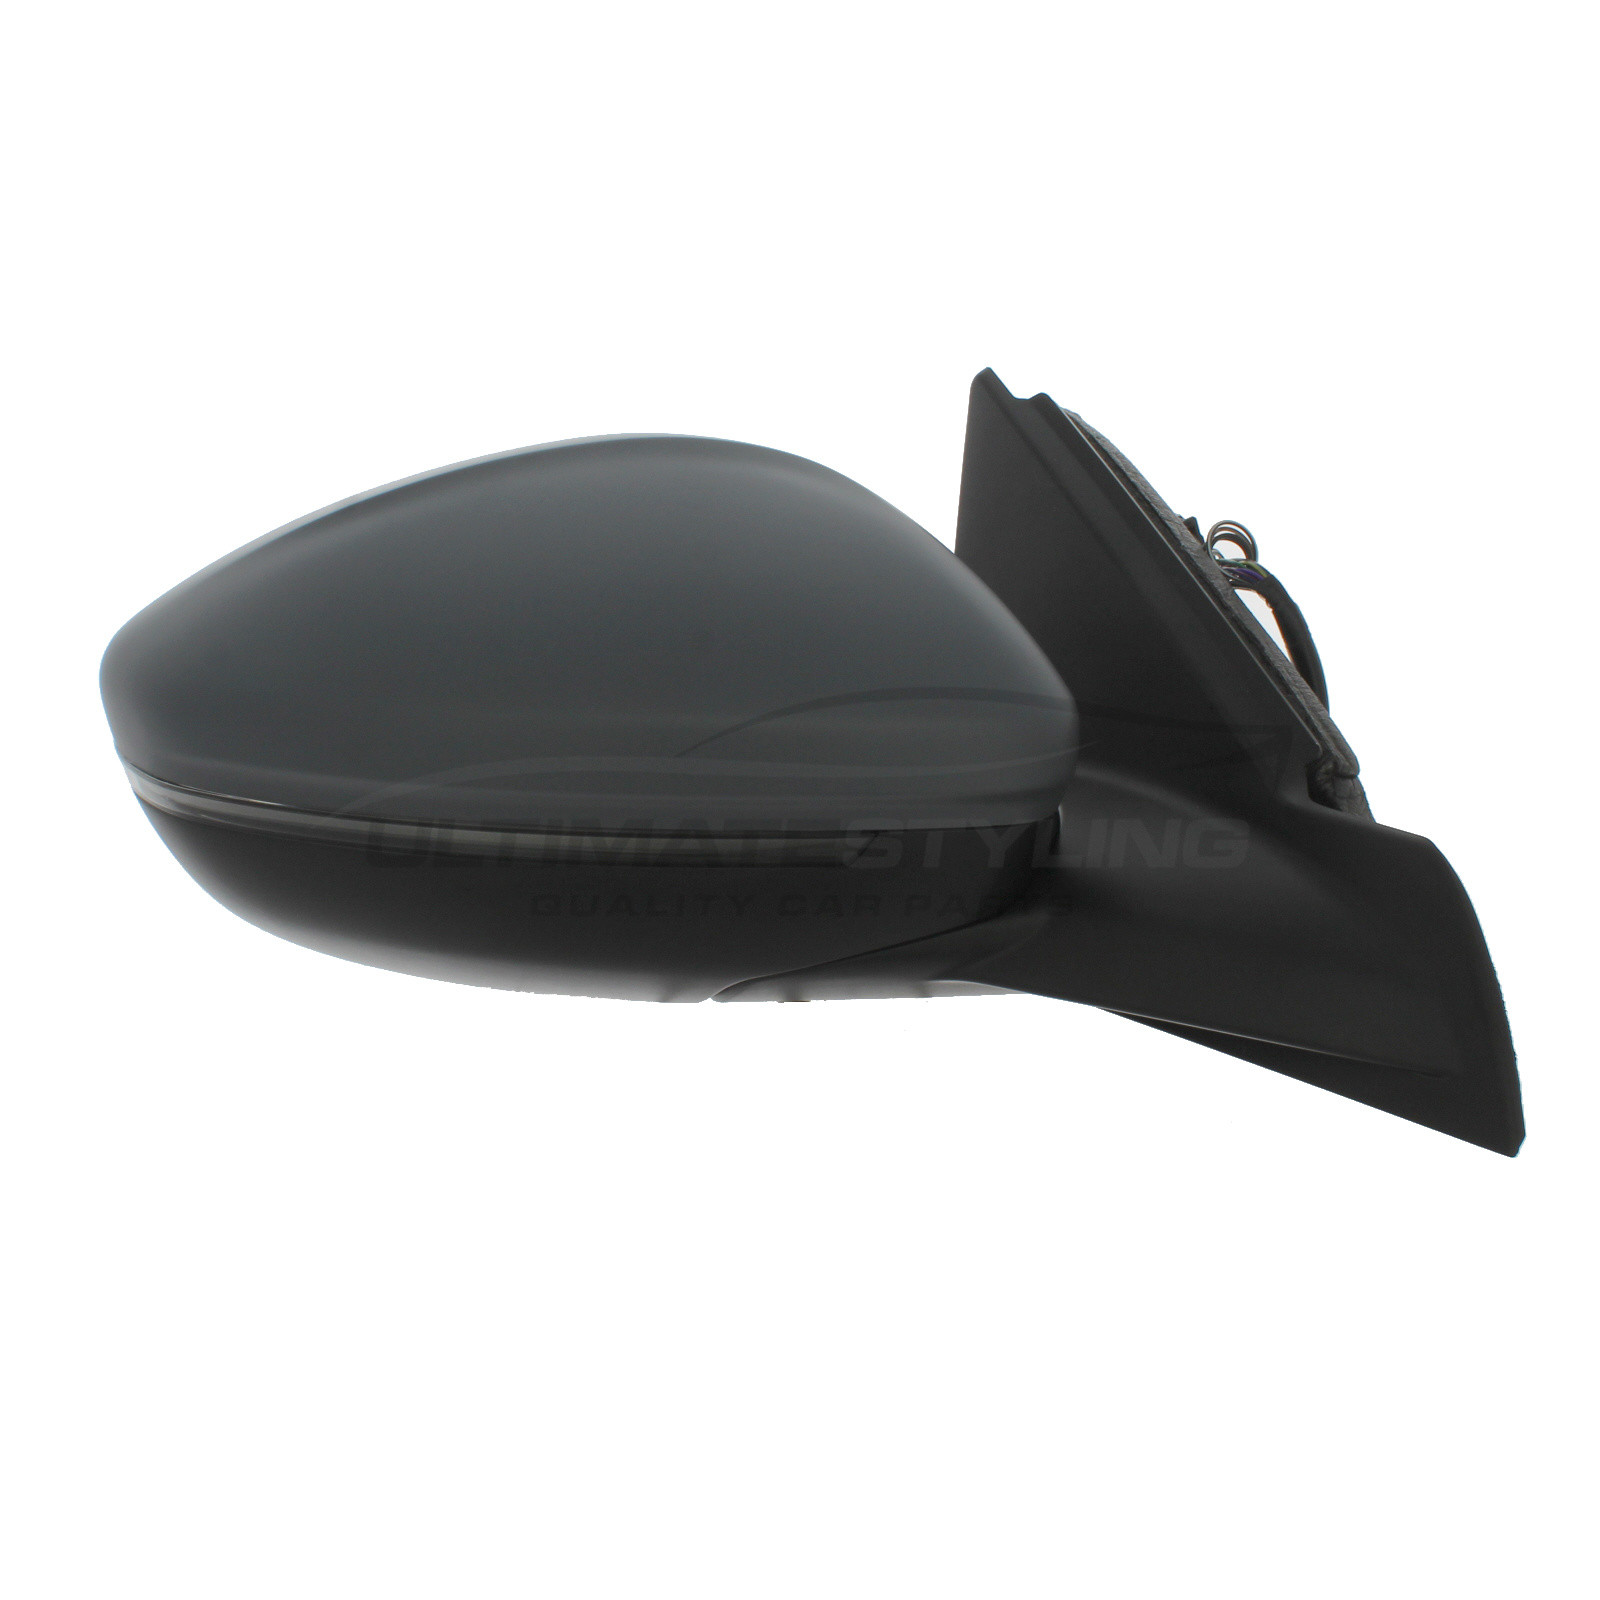 Peugeot 208, Vauxhall Corsa Wing Mirror / Door Mirror - Drivers Side (RH) - Electric adjustment - Heated Glass - Power Folding - Indicator - Puddle Light - Temperature Sensor - Primed